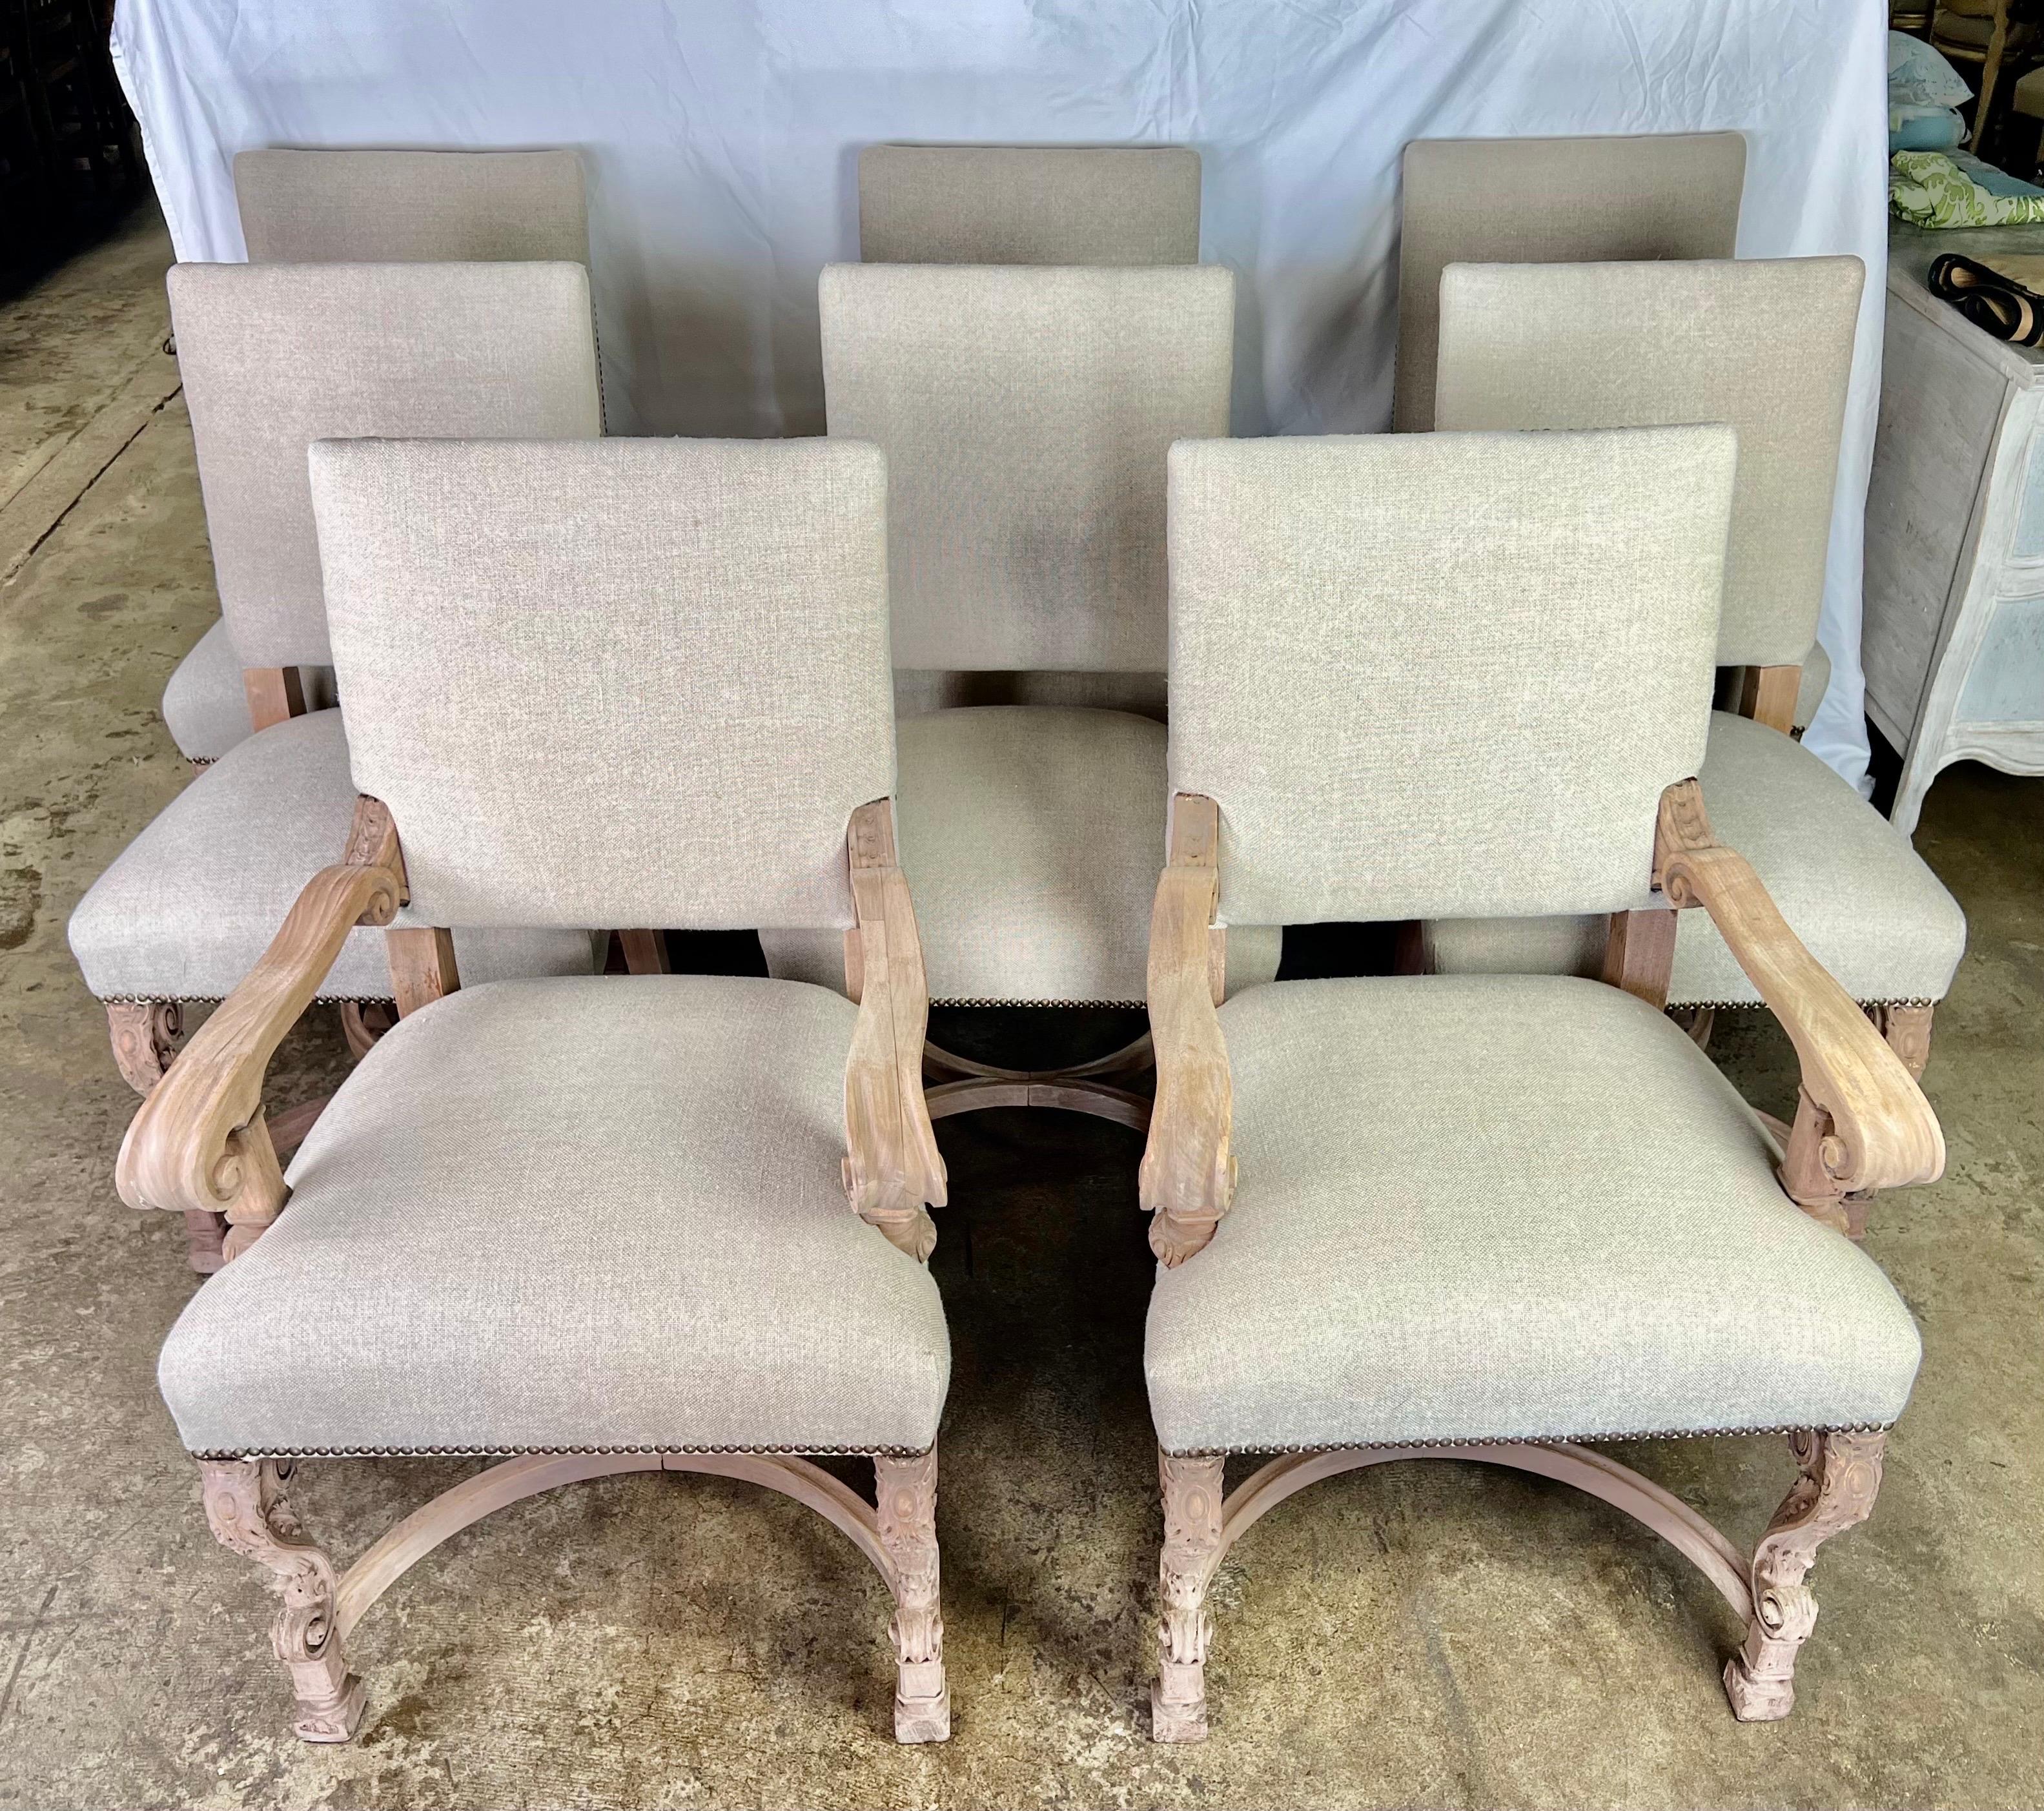 Set of Eight French bleached mahogany dining chairs. The chairs stand on four carved cabriole legs with rams head feet. The chairs are newly upholstered in a washed Belgium linen textile.